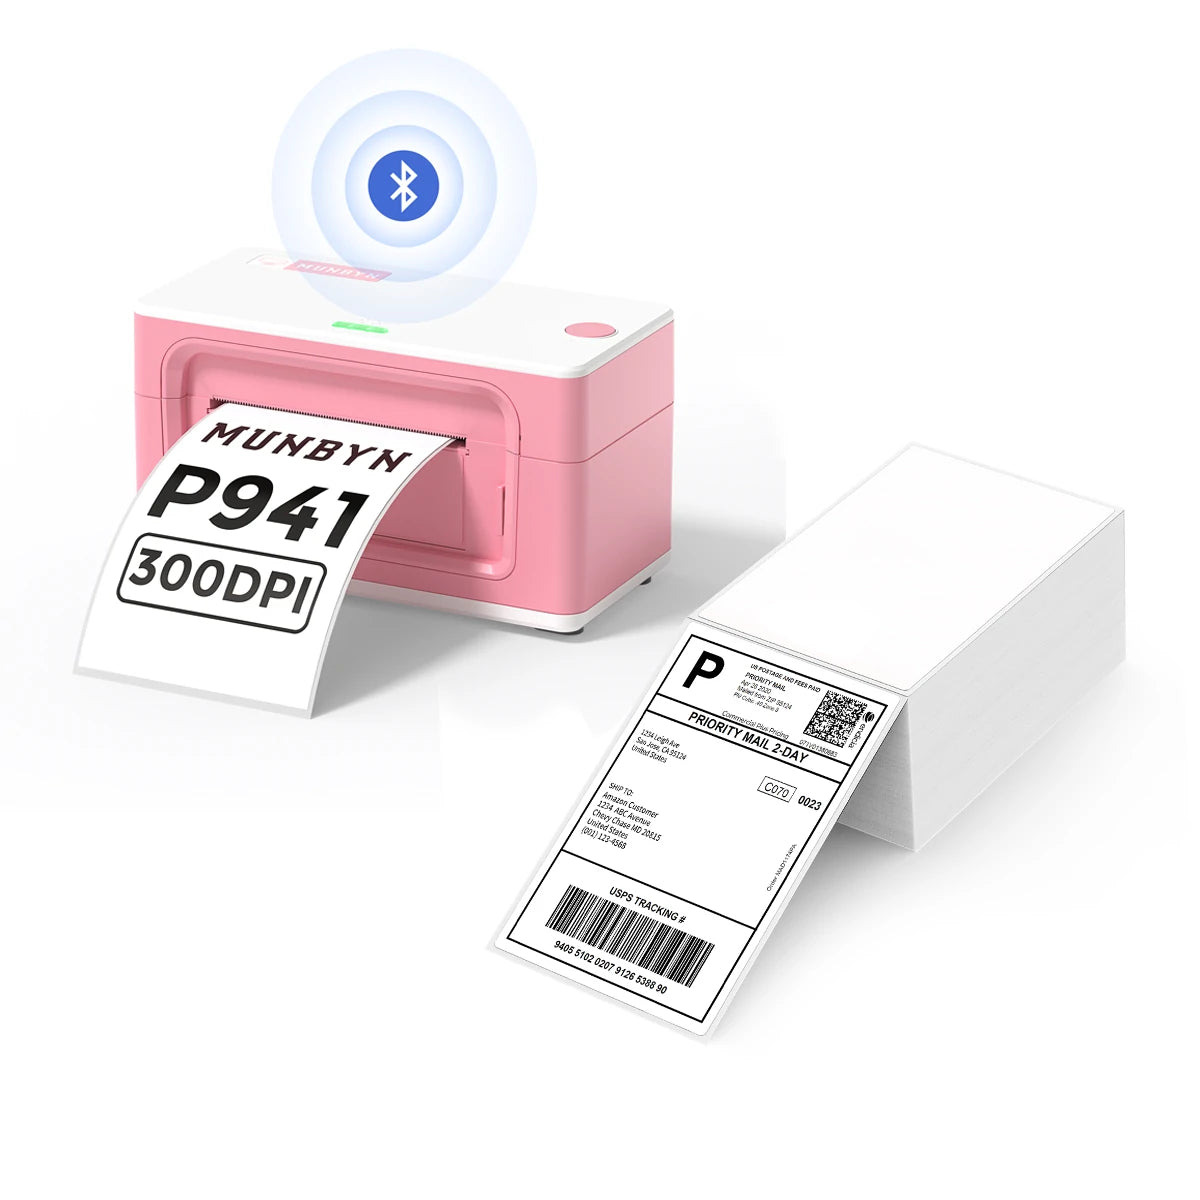 MUNBYN P941B pink Bluetooth Thermal Label Printer Kit includes a pink Bluetooth label printer and a stack of shipping labels.